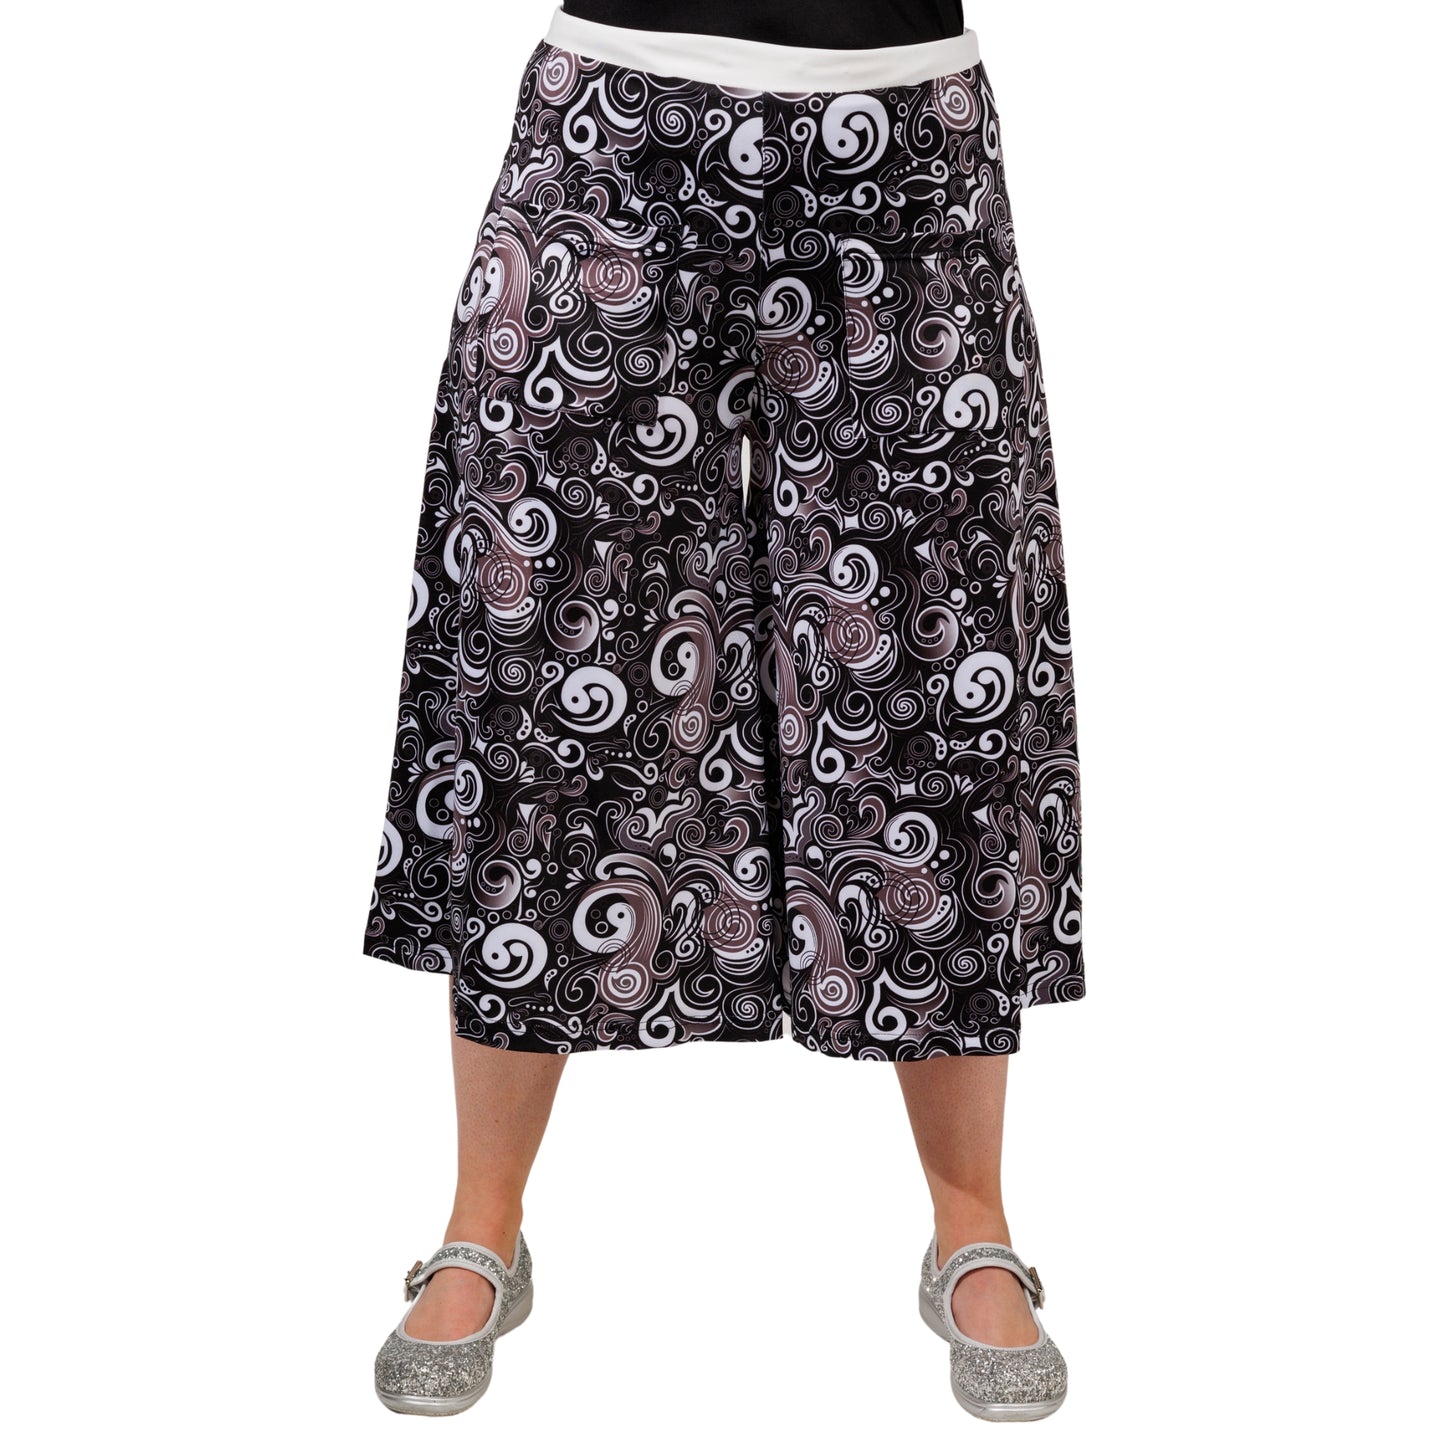 Abstract Culottes by RainbowsAndFairies.com (Black & White - Psychedelic - 3 Quarter Wide Leg Pants - Cute - Vintage Inspired) - SKU: CL_CULTS_ABSTR_ORG - Pic 01